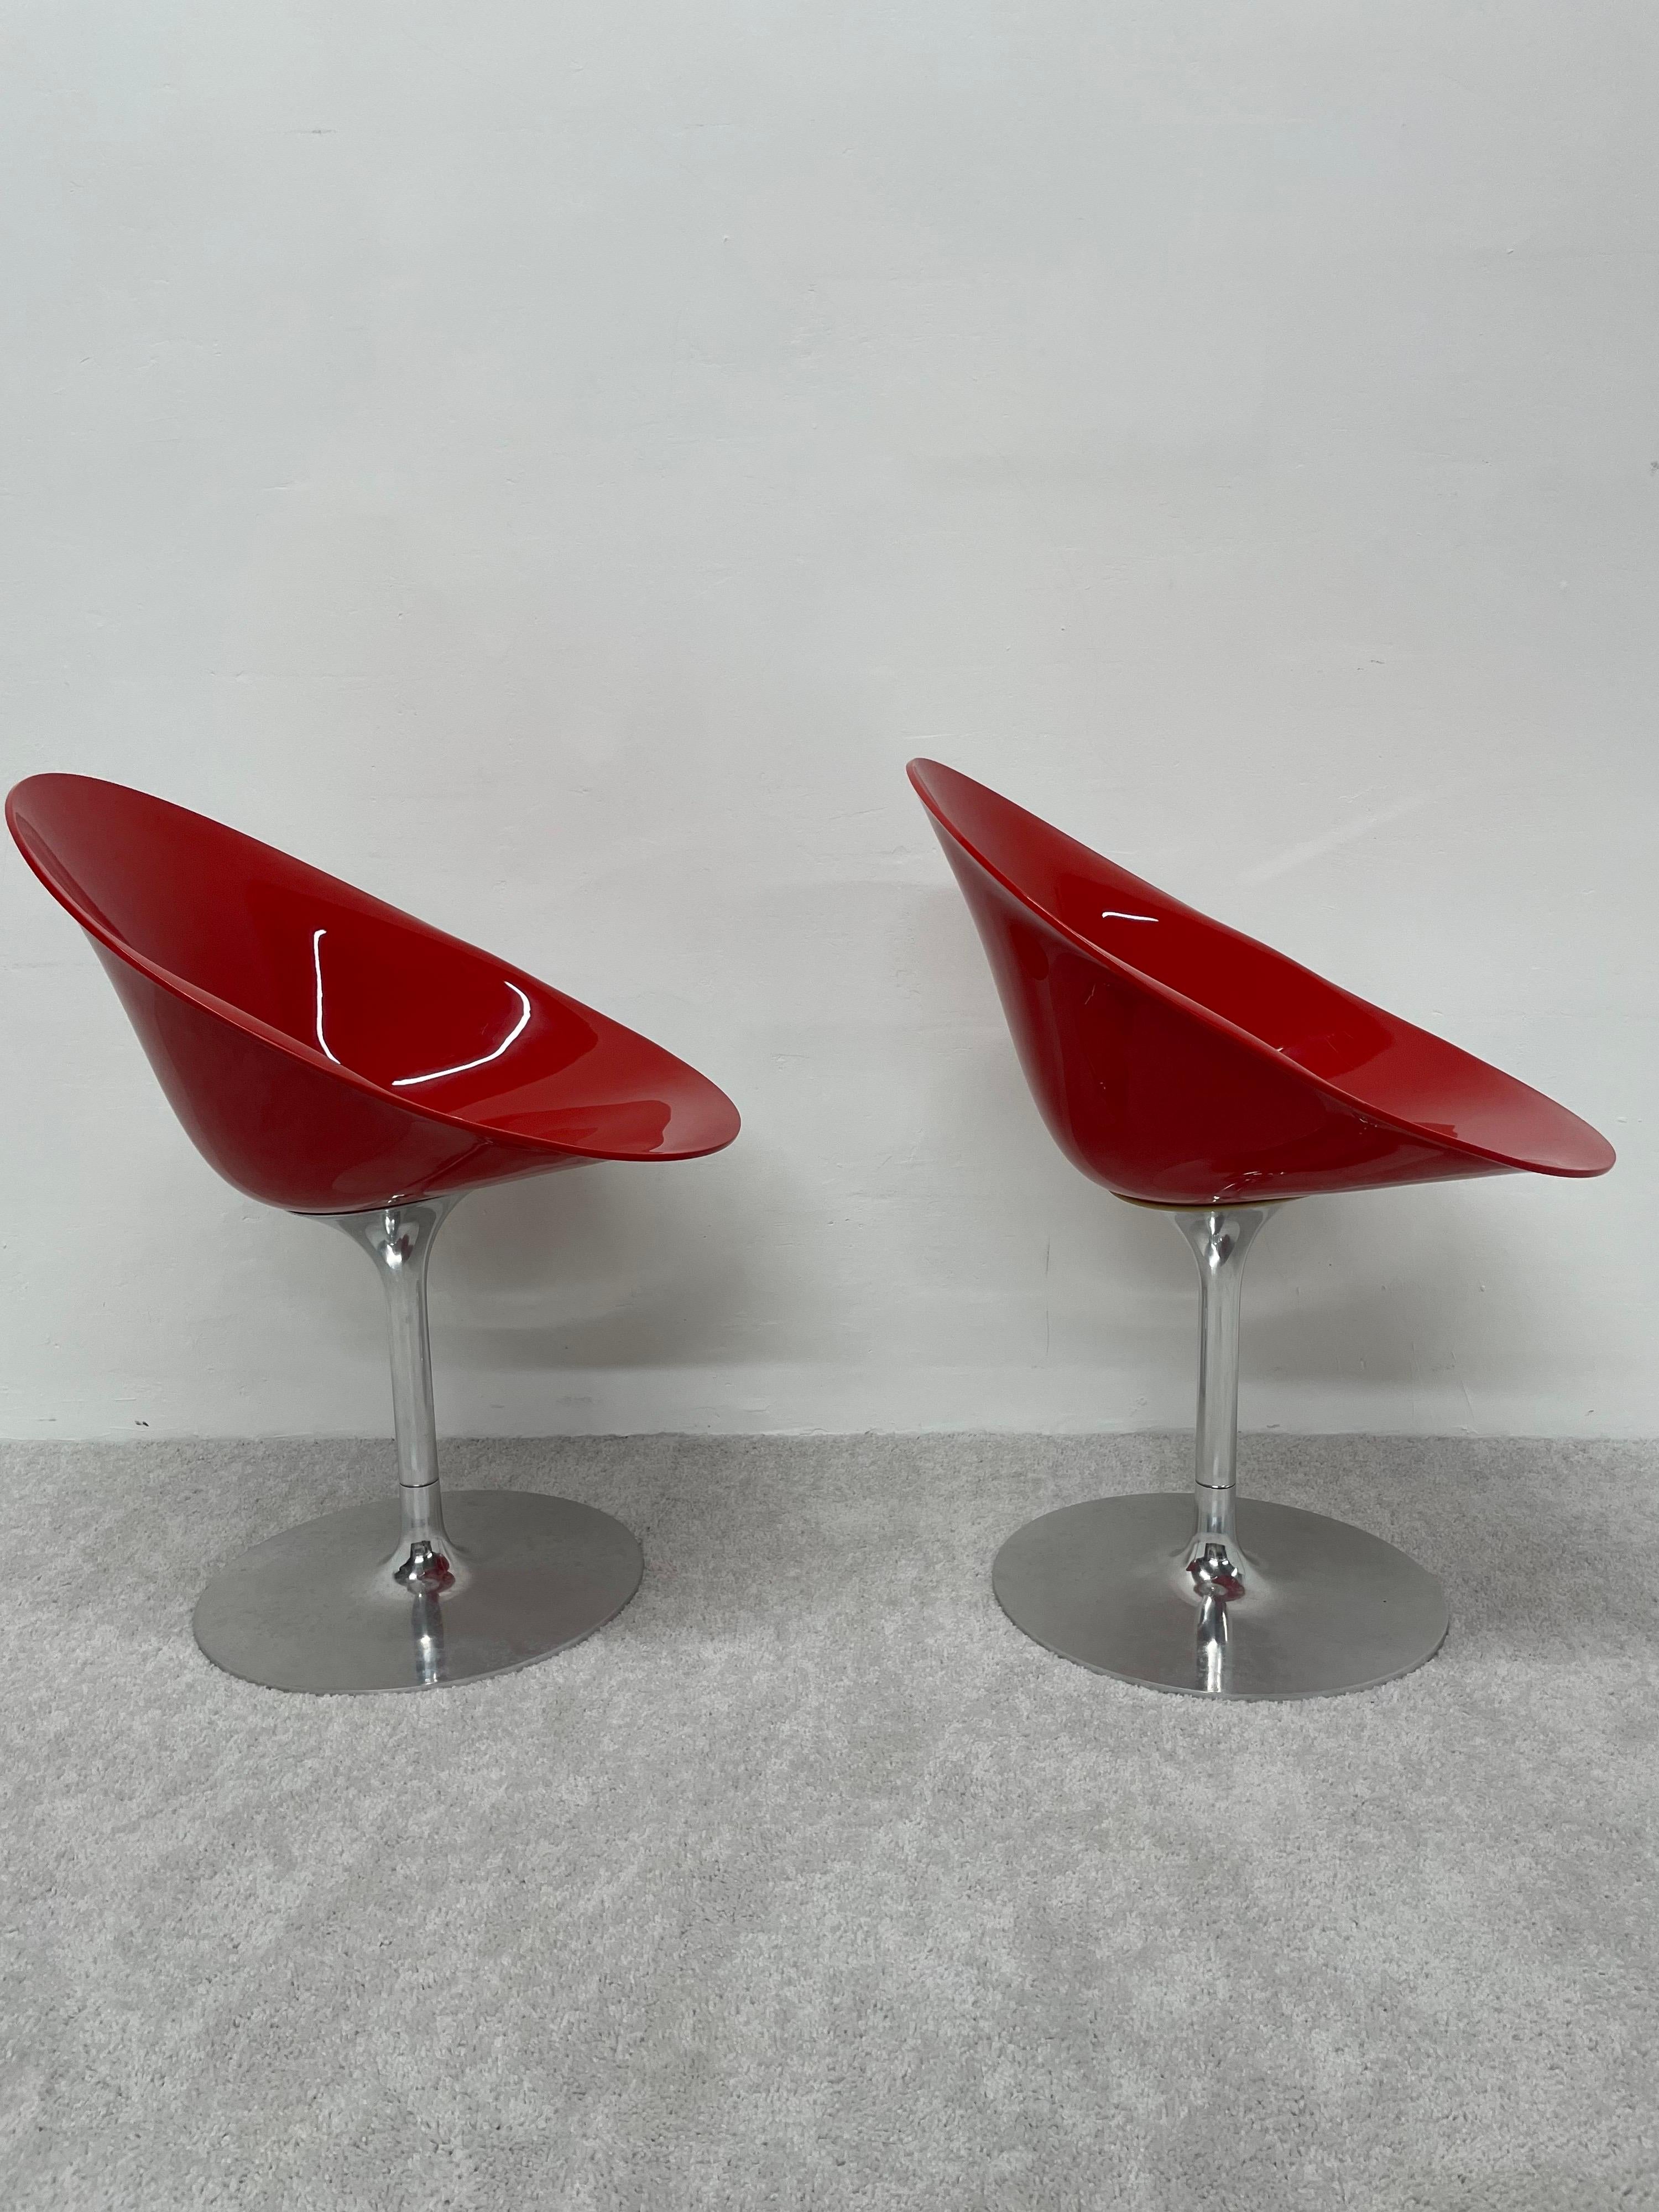 Modern Philippe Starck Red “Eros” Chairs on Aluminum Bases for Kartell - a Pair